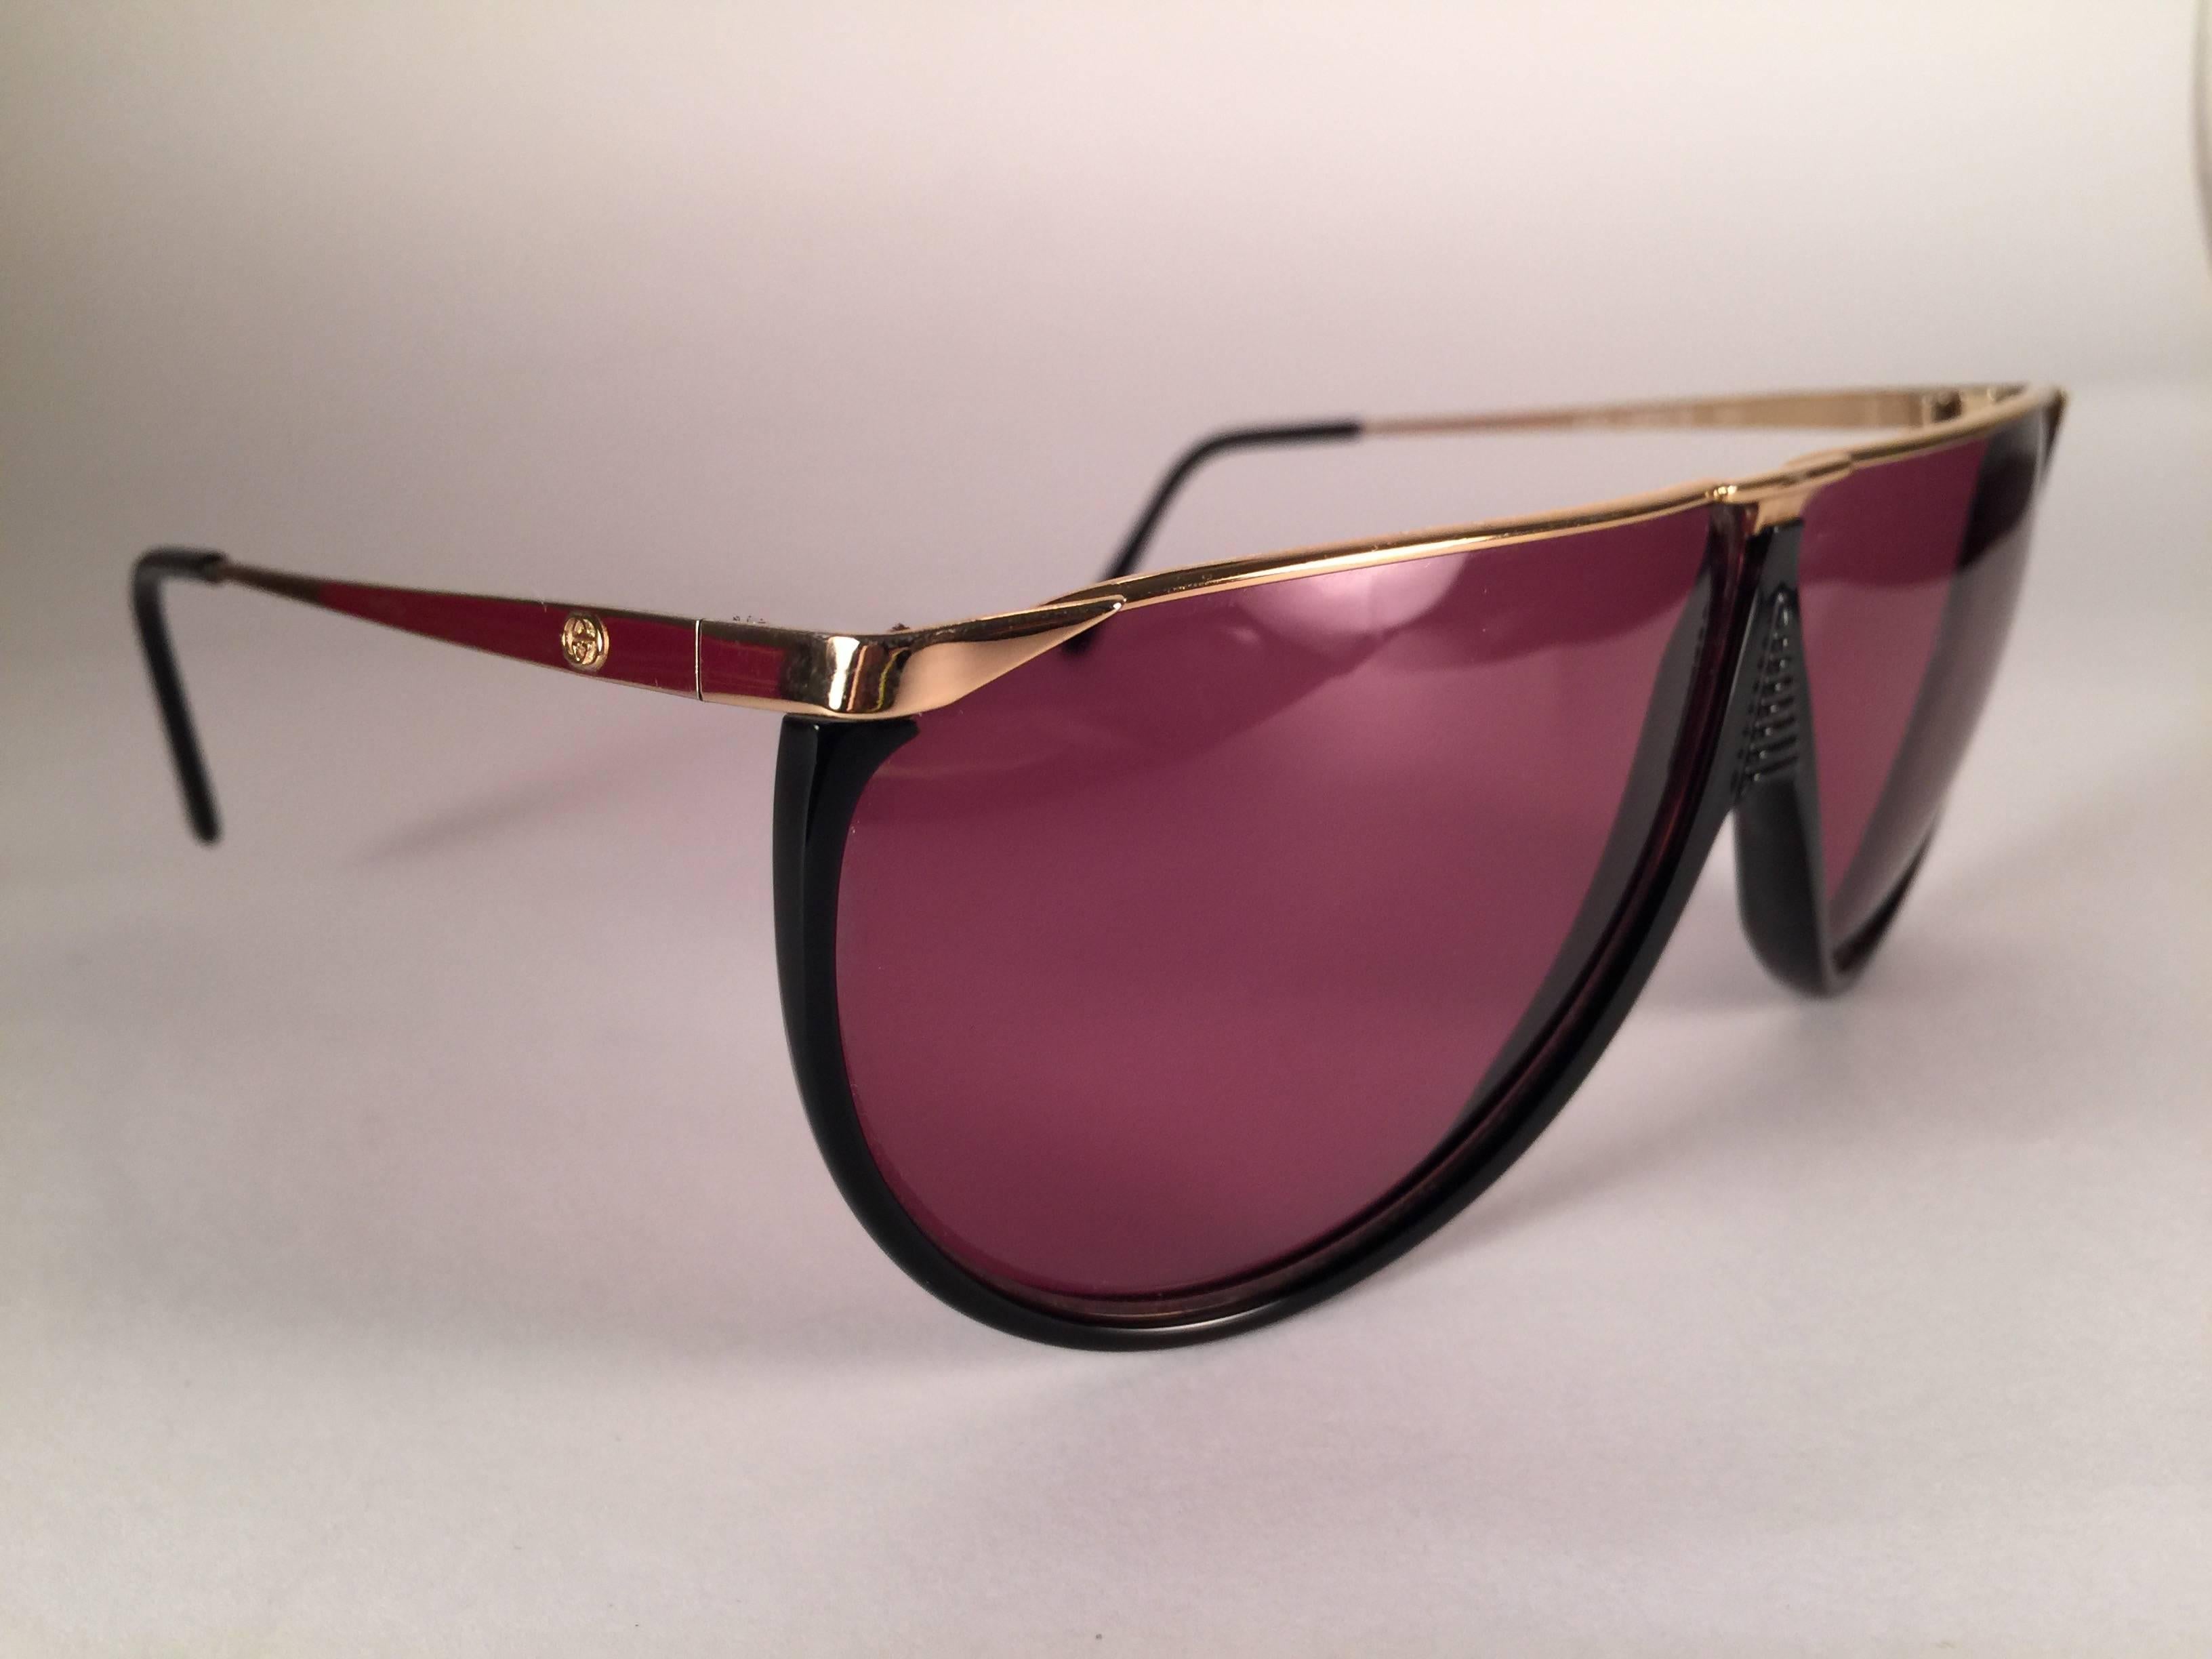 New Vintage Gucci Sunglasses in sleek black with gold details frame.
Spotless purple lenses. 
New never worn or displayed. This item could show minor sign of wear due to nearly 30 years of storage.
Made in Italy.